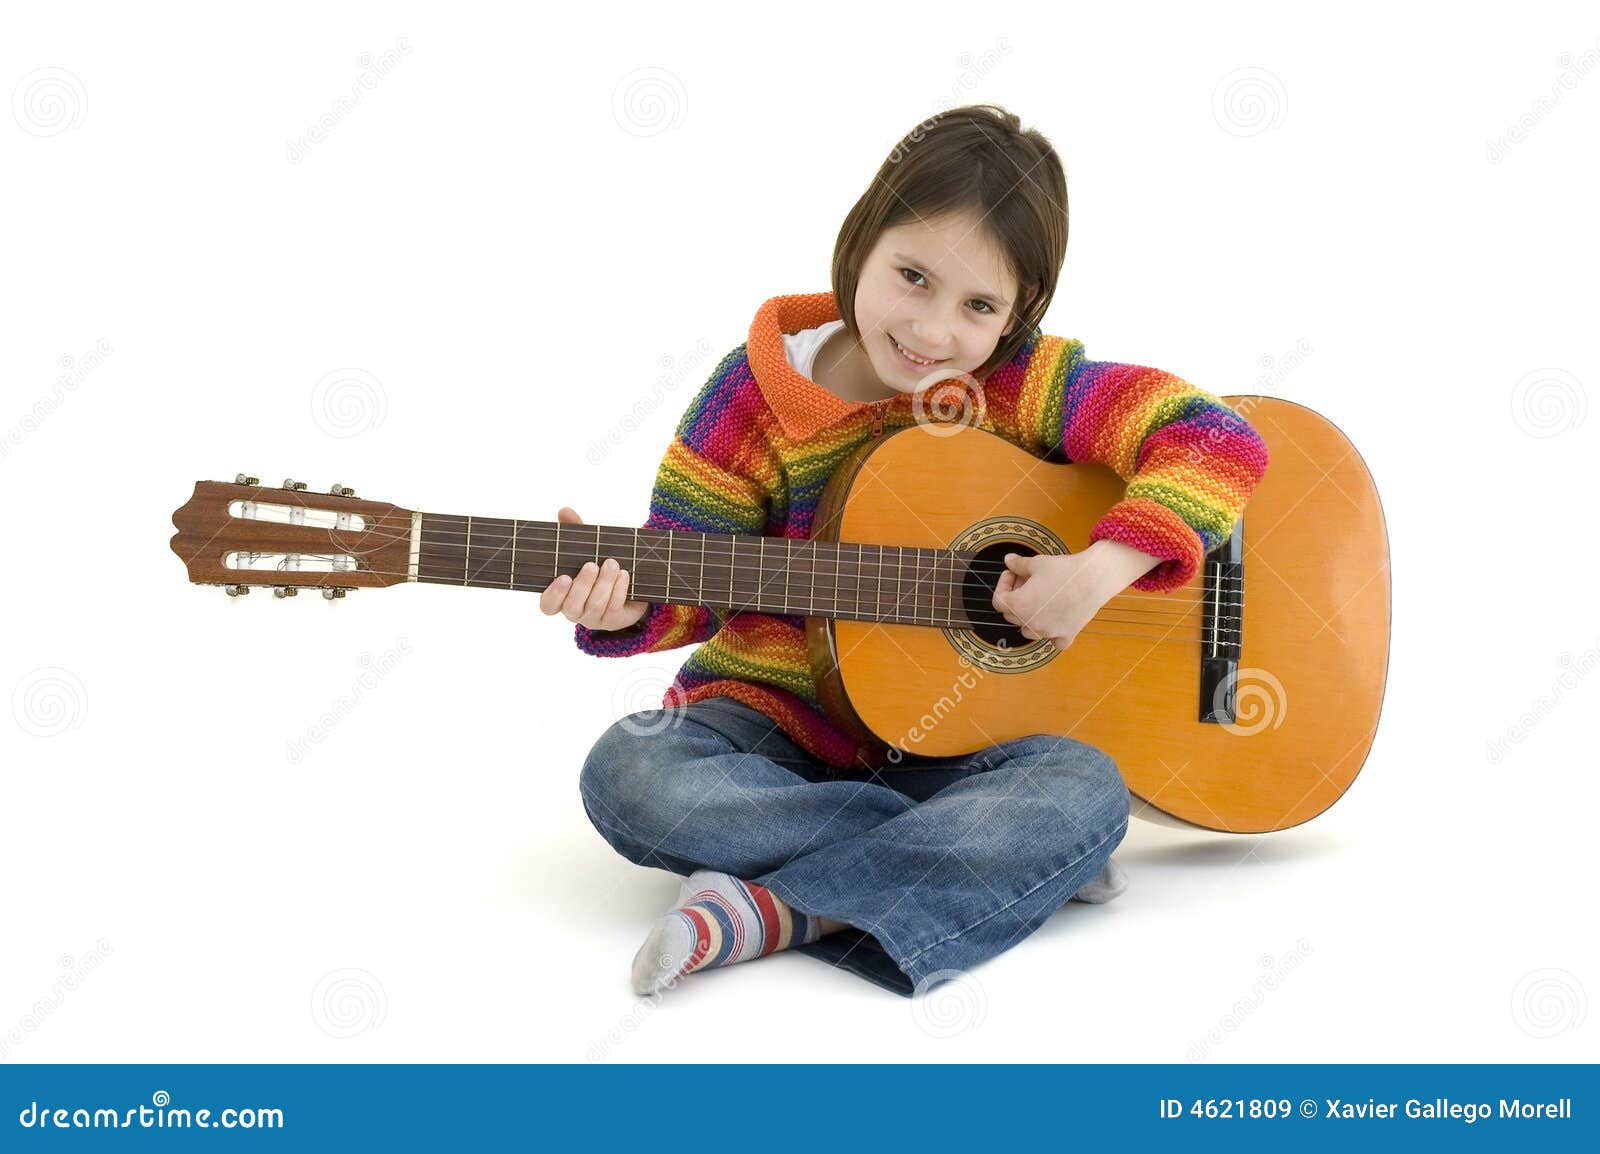 girl playing guitar clipart - photo #33